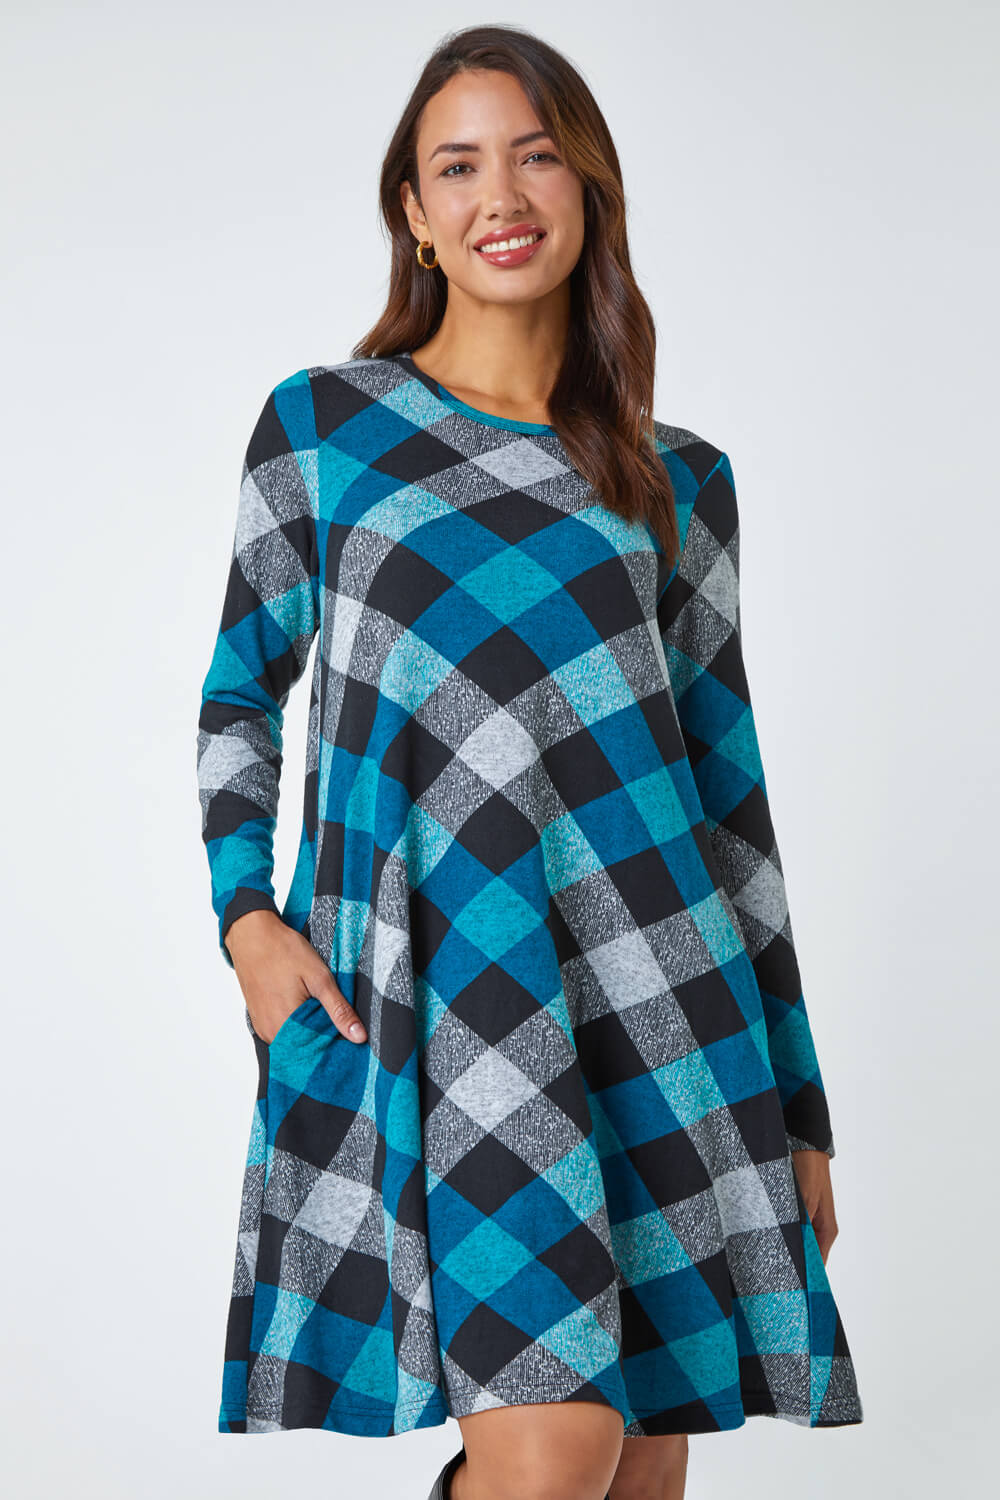 Teal Check Print Swing Stretch Dress, Image 2 of 5